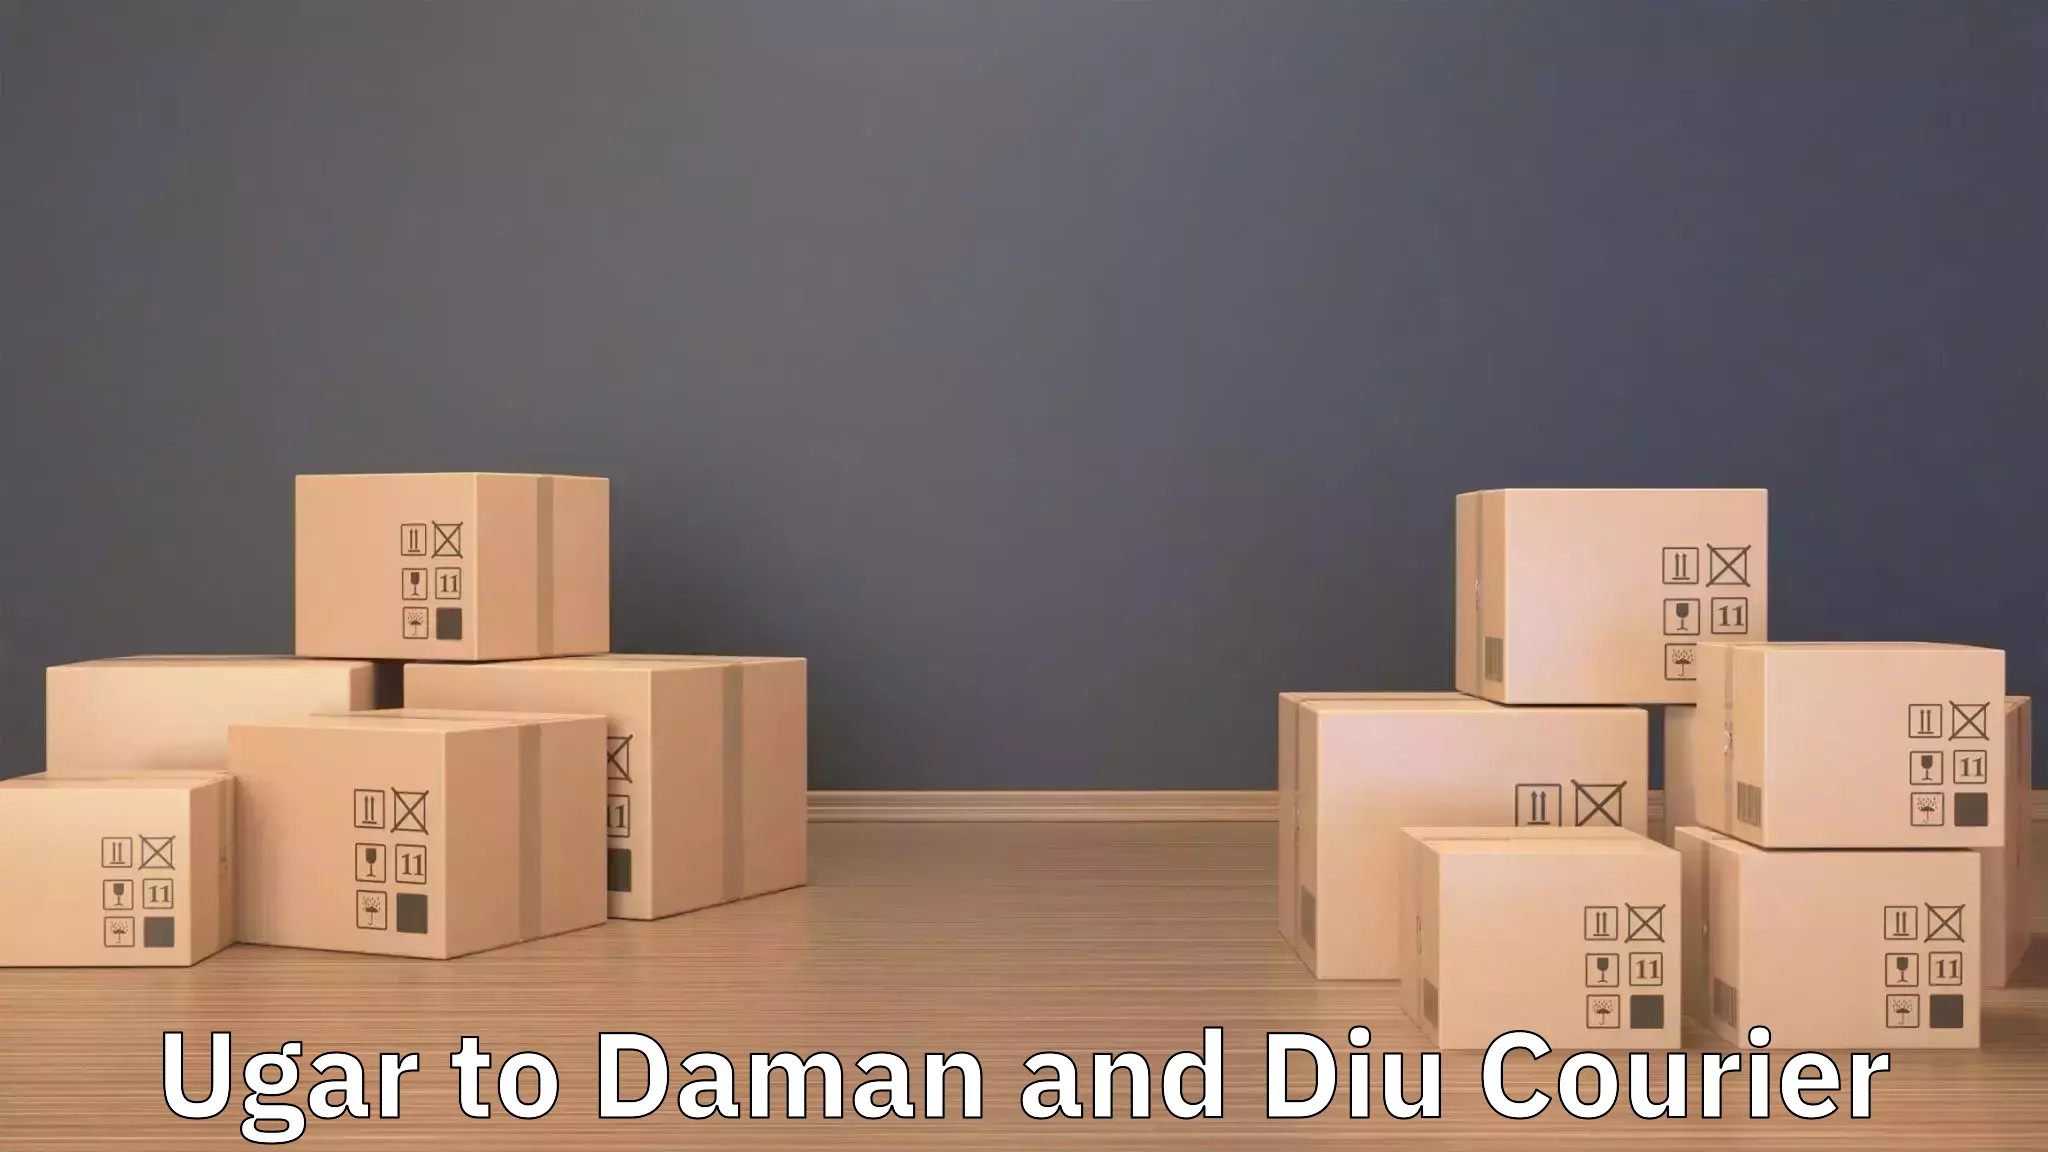 Cost-effective moving options Ugar to Daman and Diu